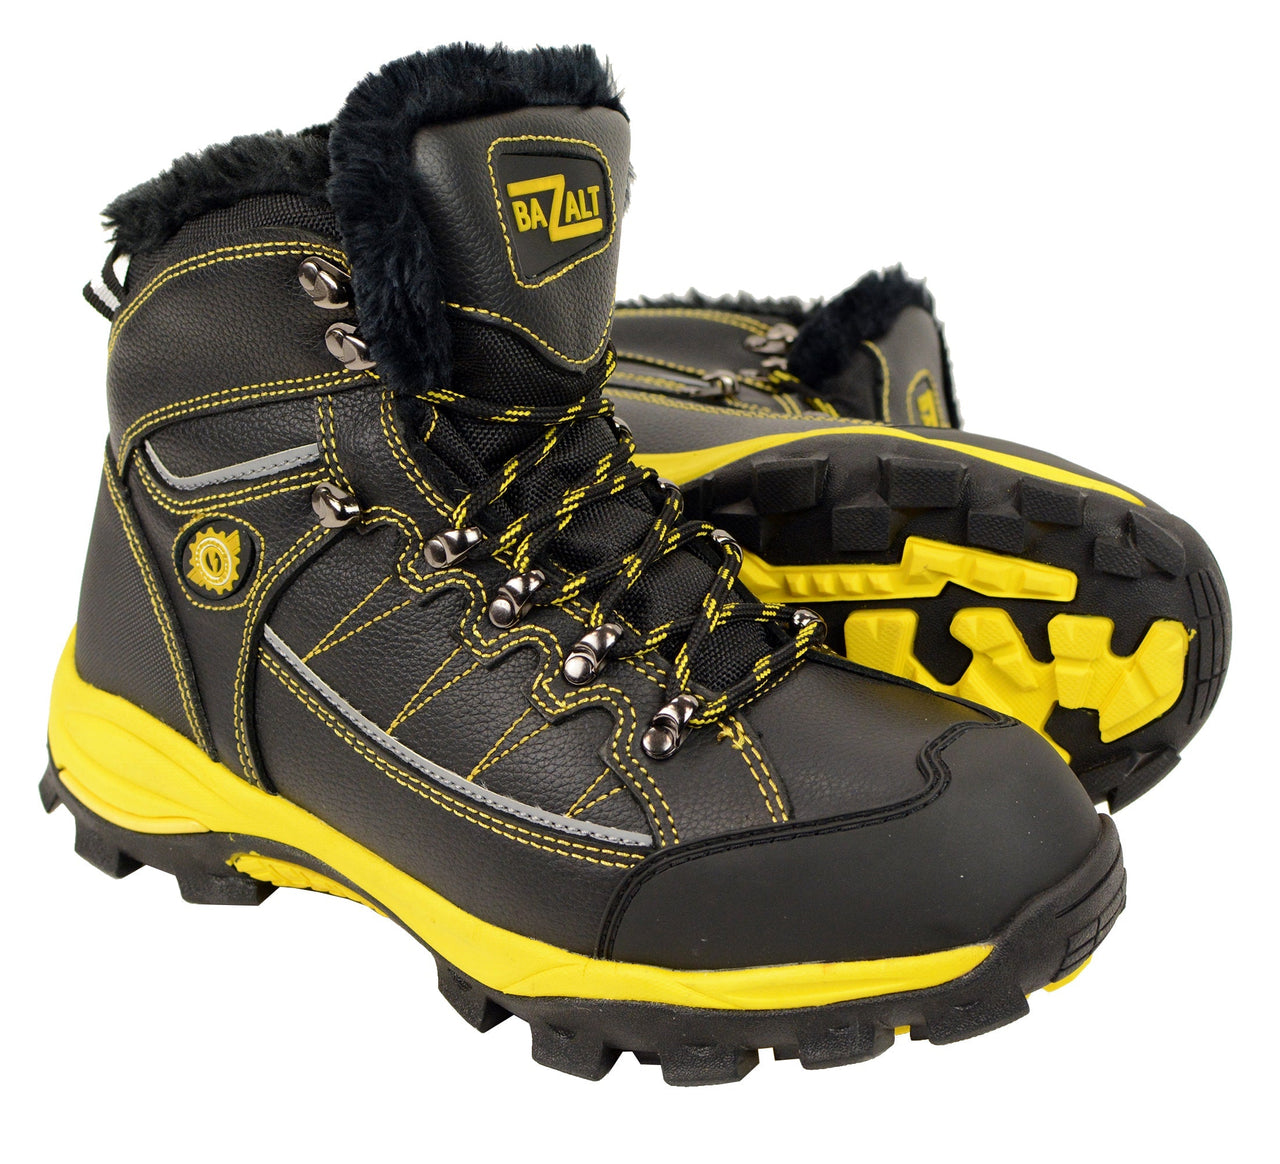 BAZALT-Men's Black & Yellow Water & Frost Proof Leather Boots w/ Faux Fur Lining-BLK/YELLOW-7 - HighwayLeather